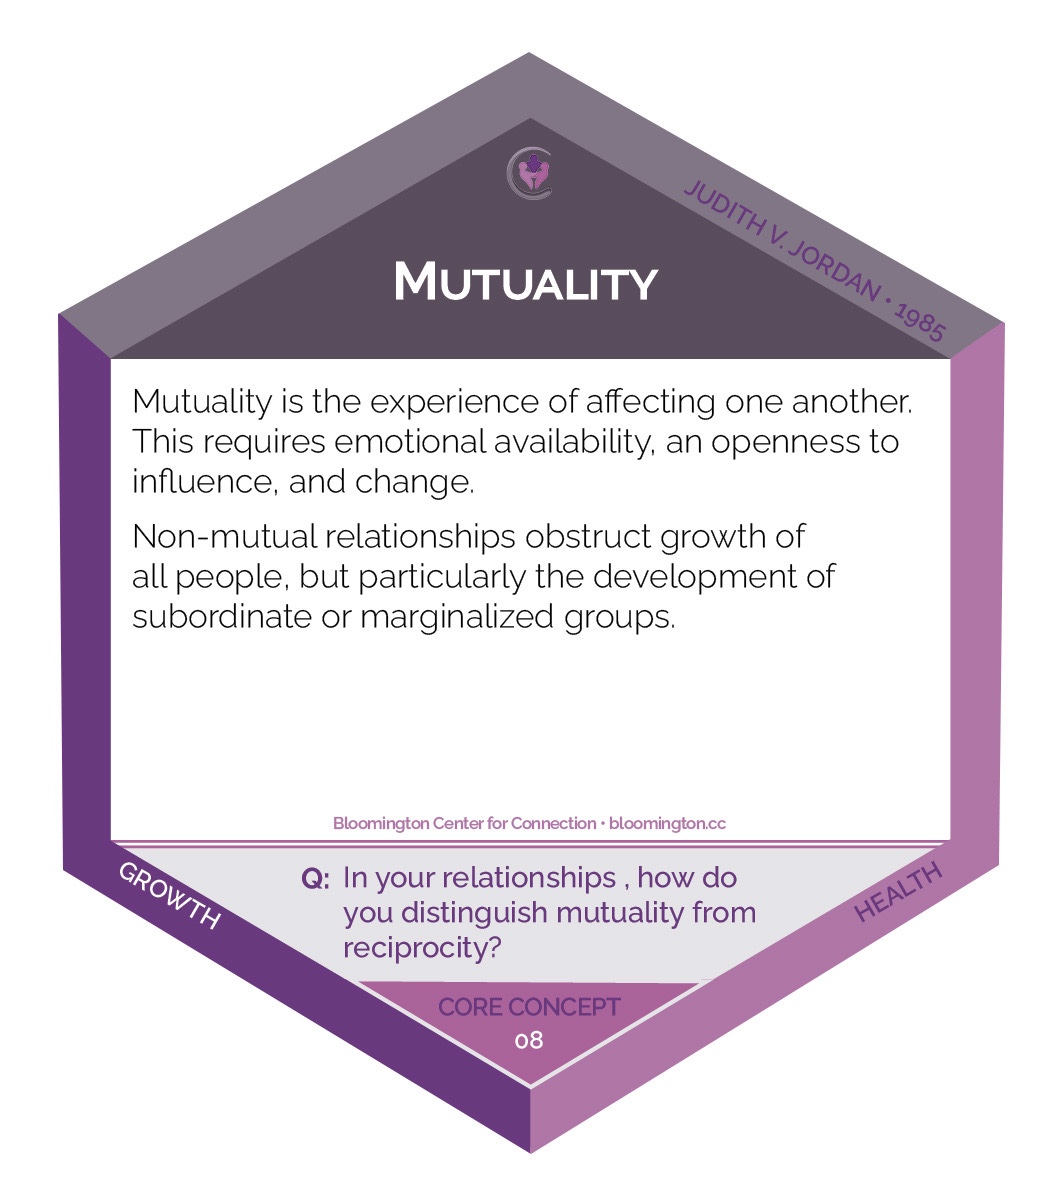 A card reading Mutuality is the experience of affecting one another. This requires emotional availability, an openness to influence and change. Non-mutual relationships abstruct growth of all people, but particularly the development of subordinate or marginalized groups.